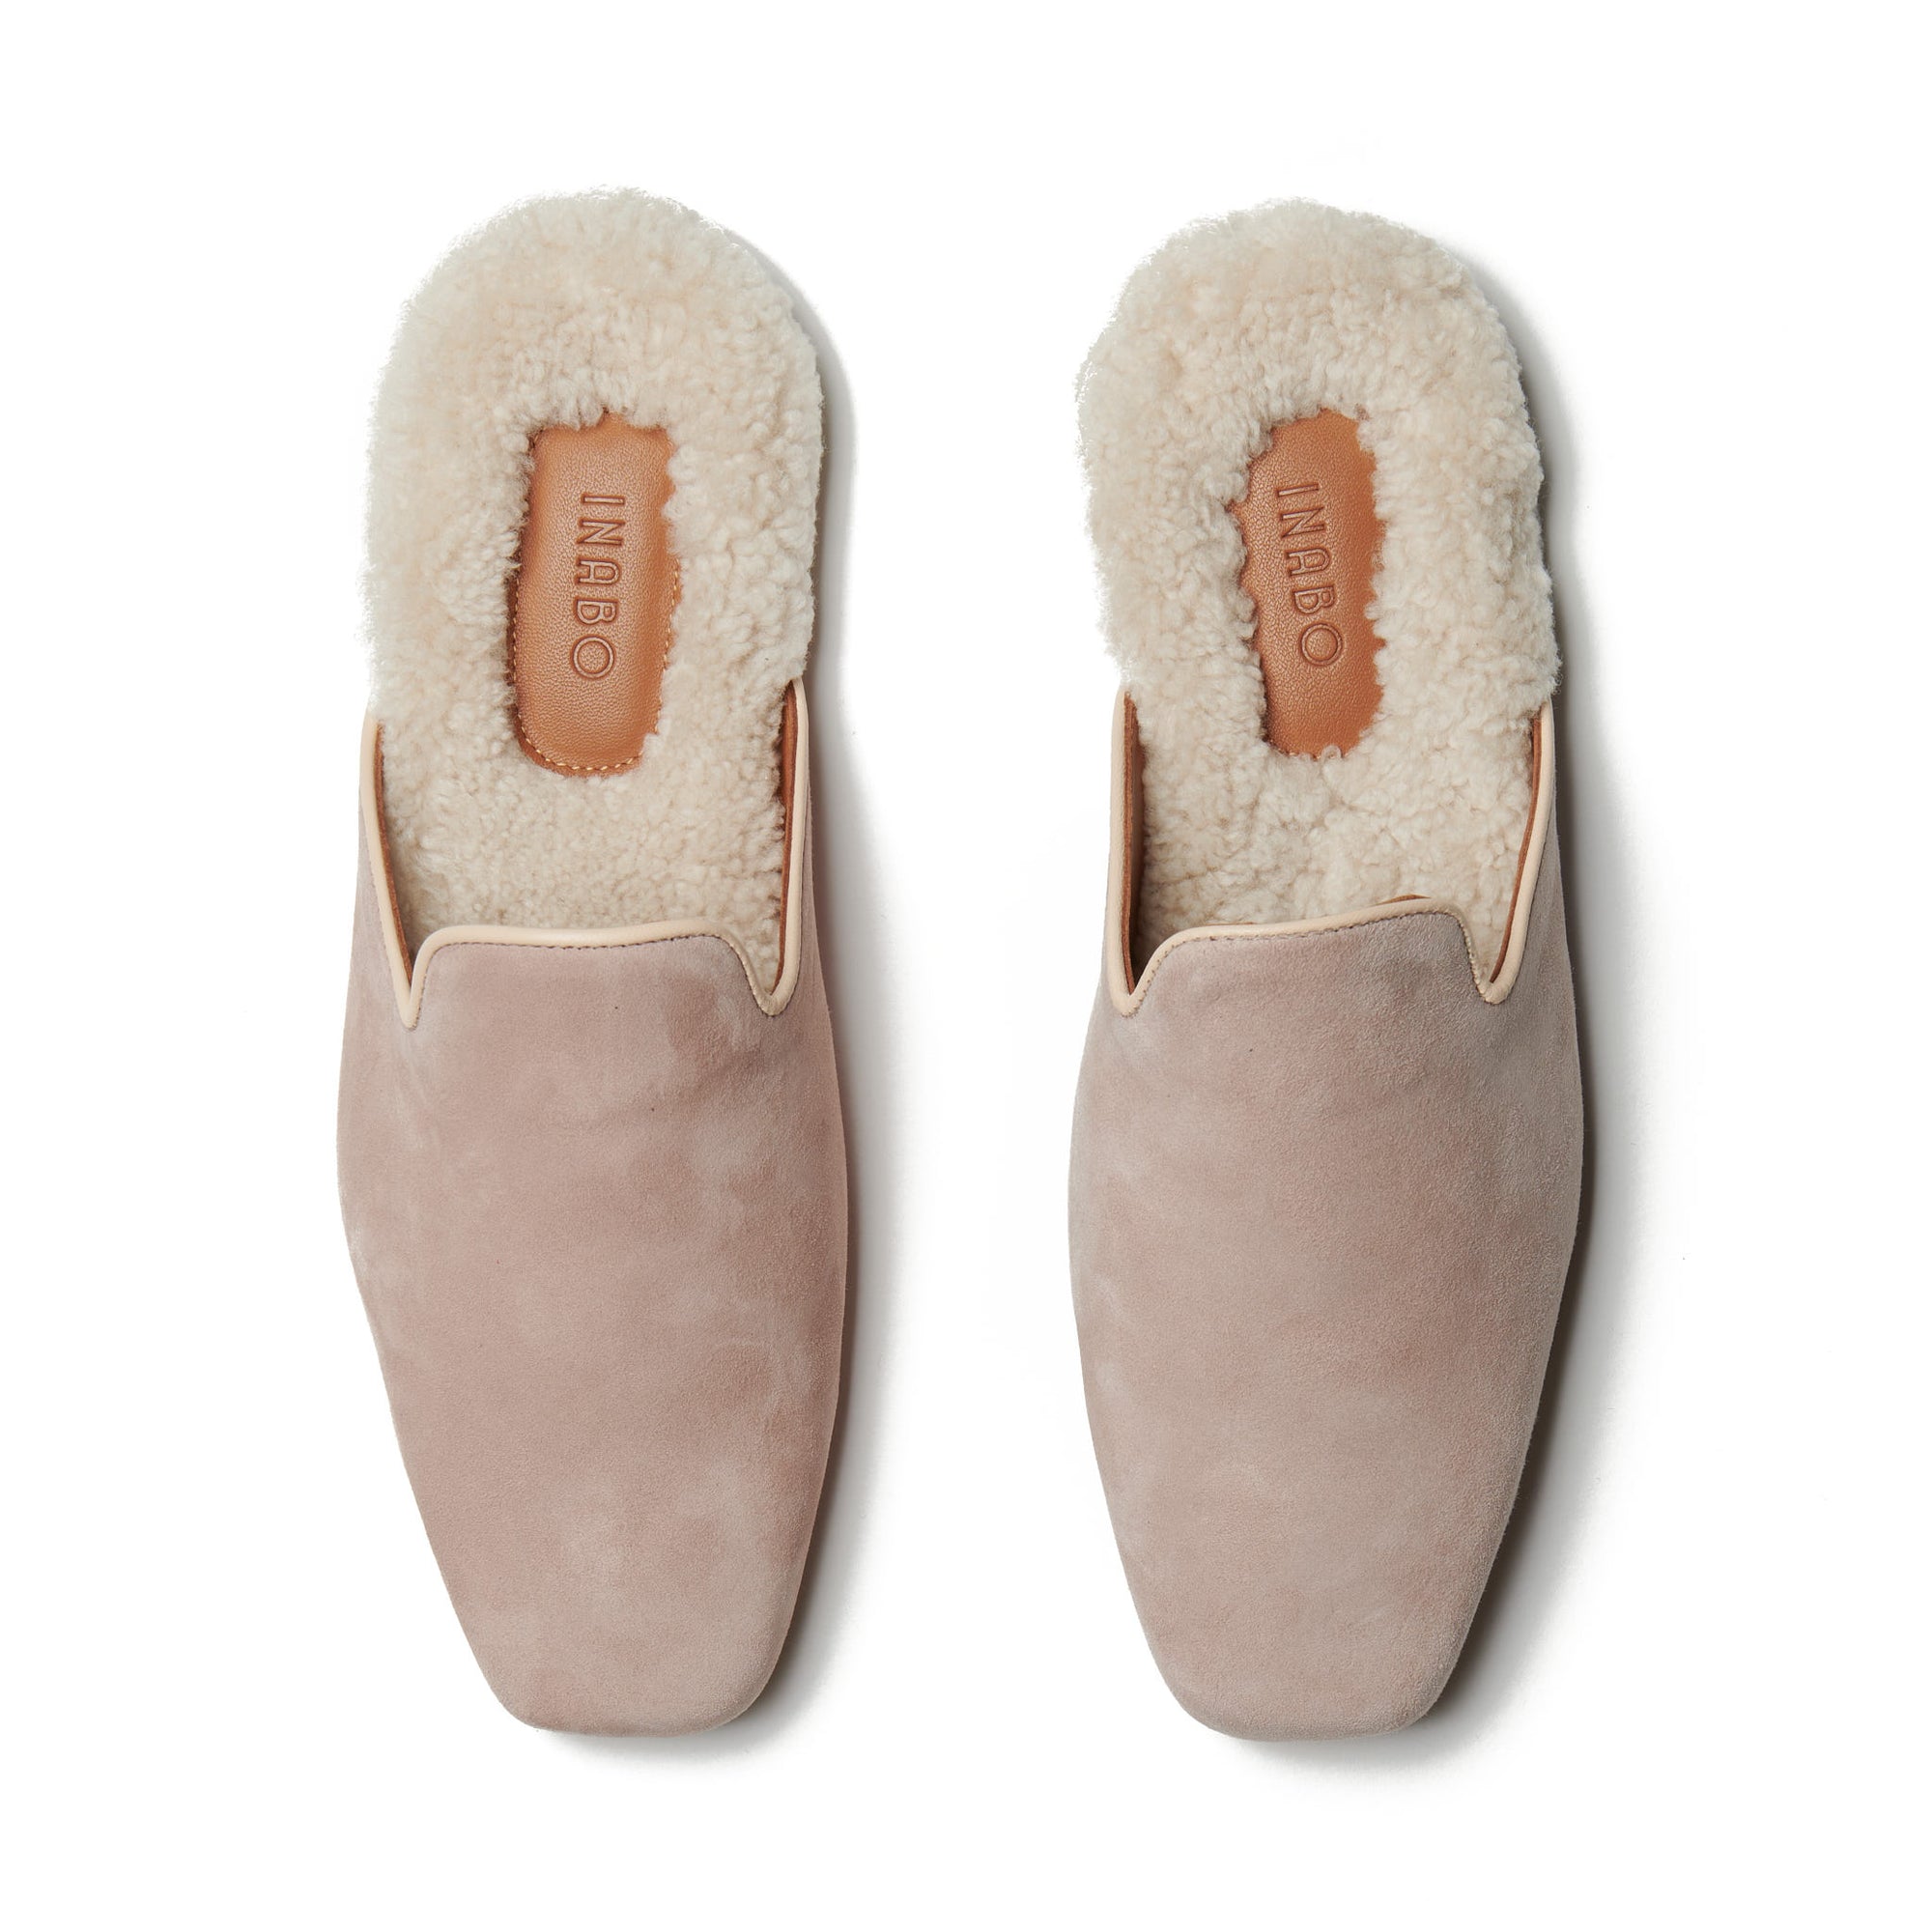 Women's Pink Suede Slippers with White Shearling